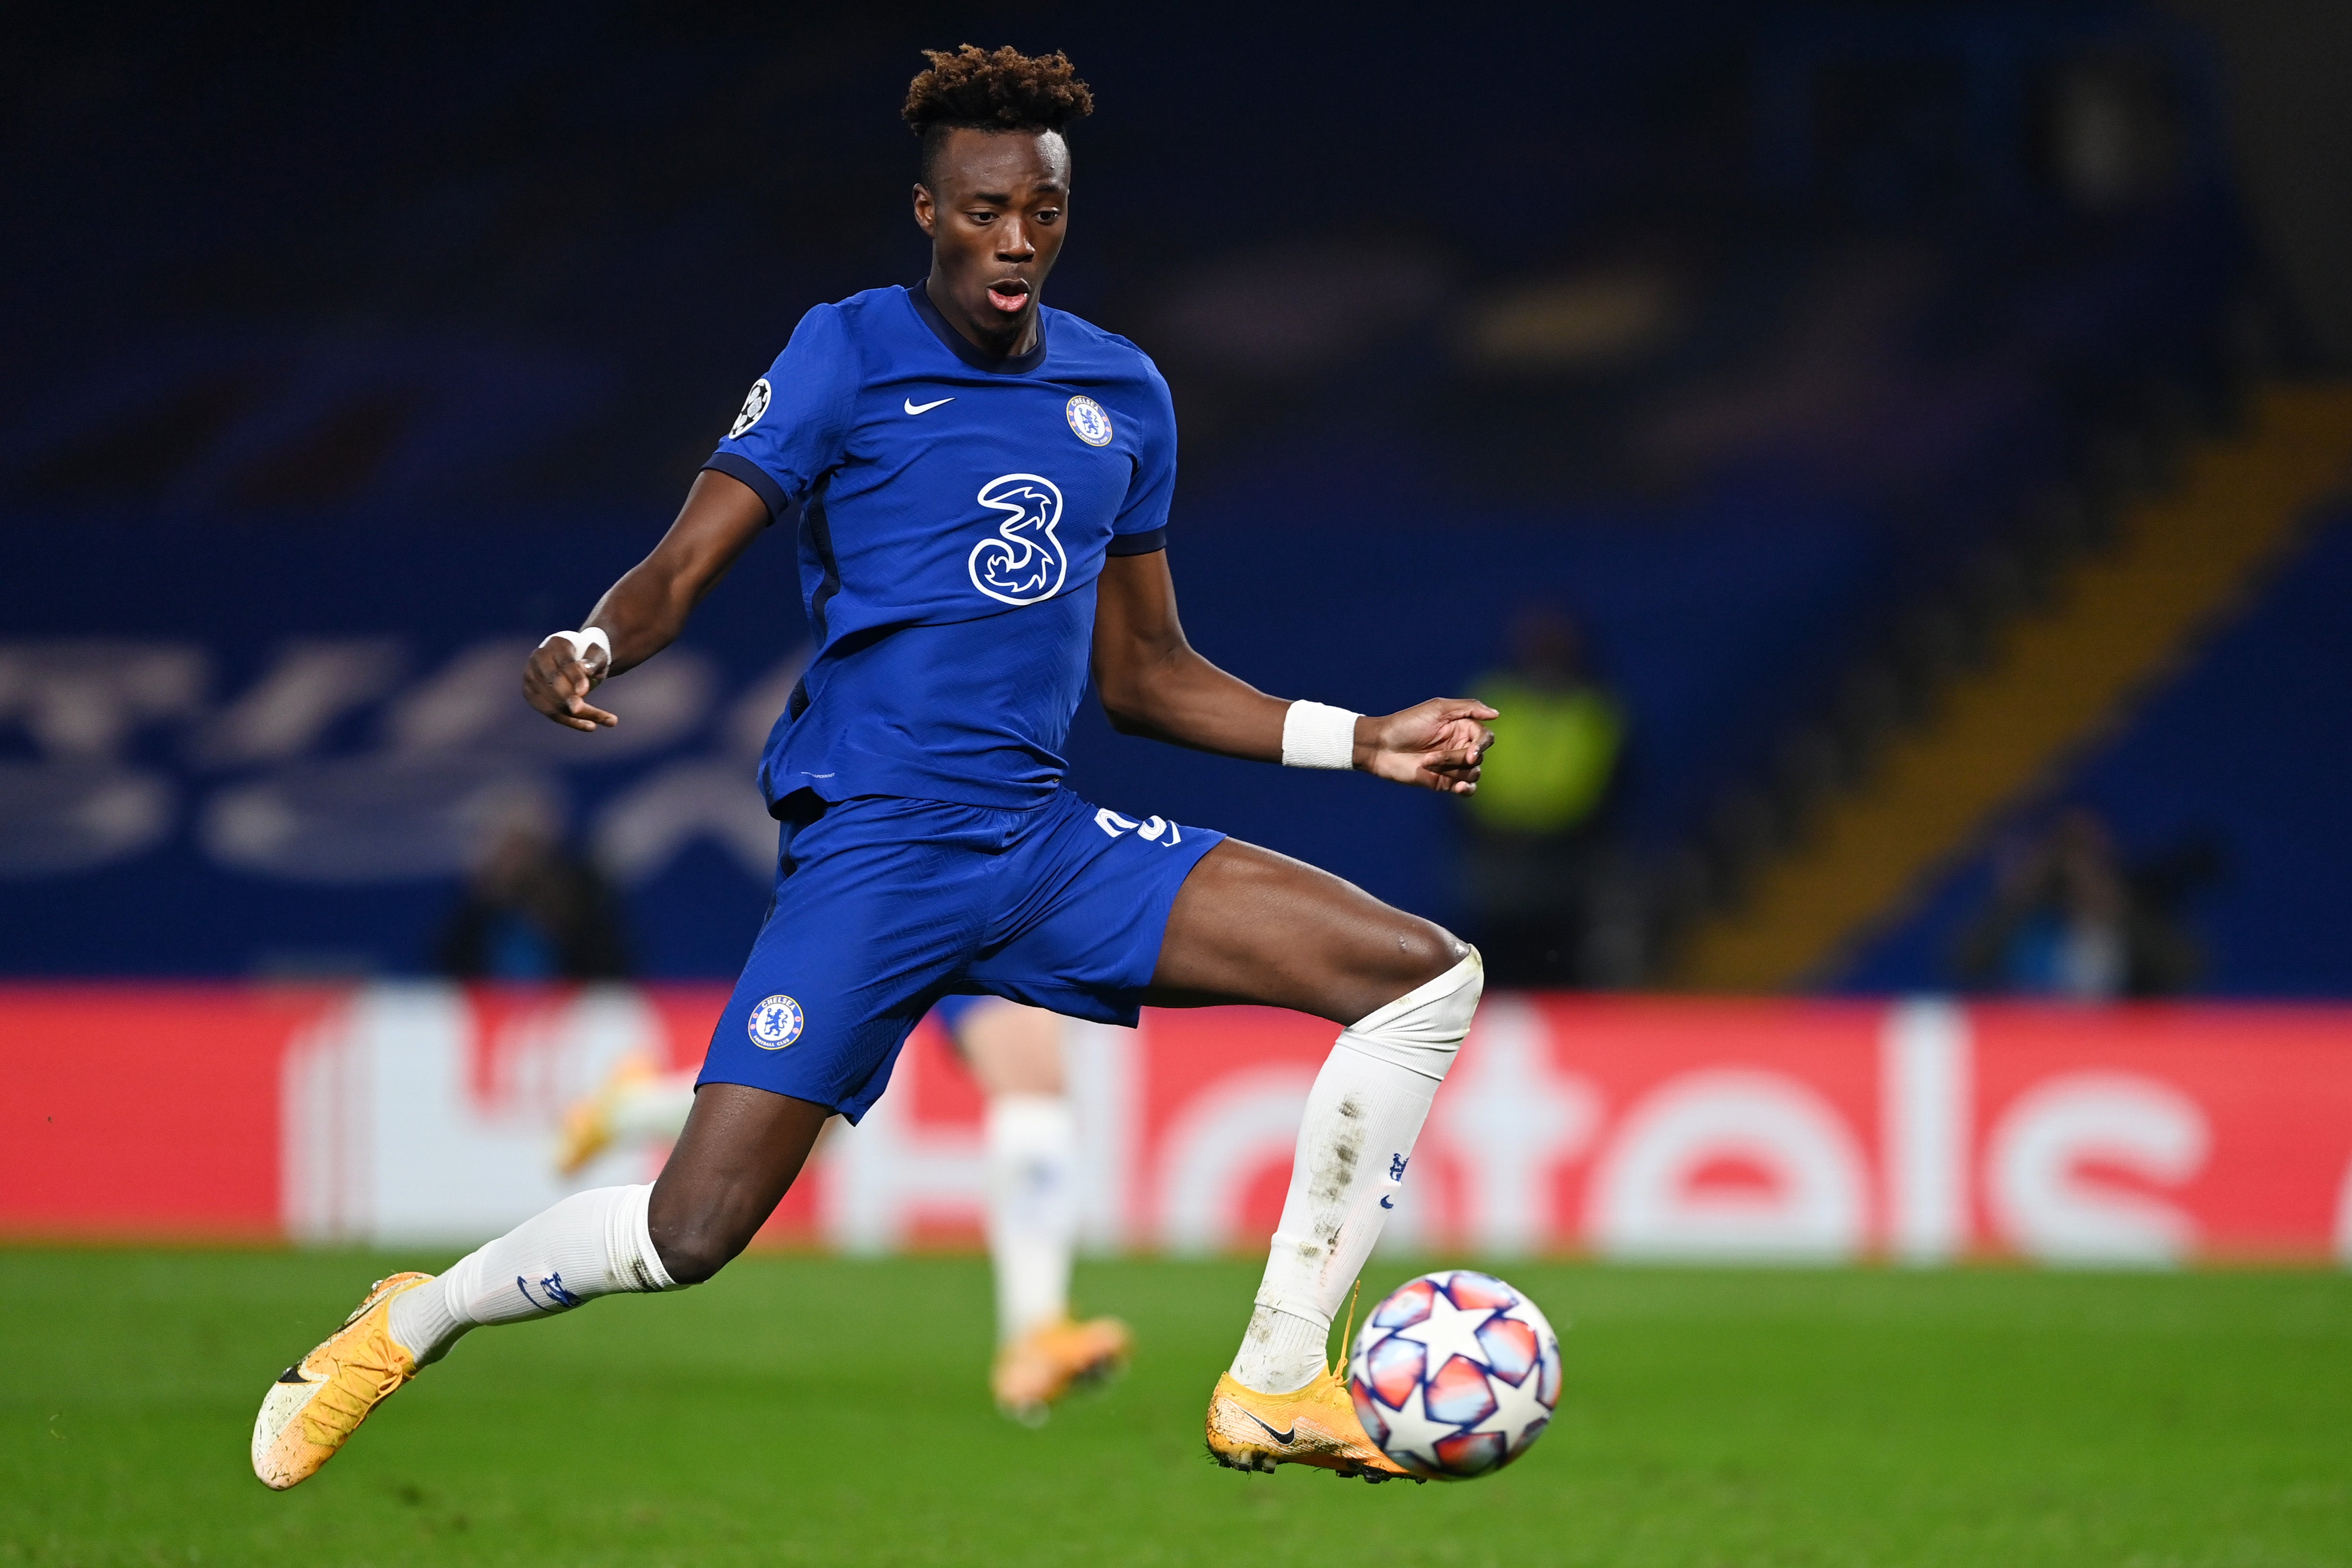 Tammy Abraham has performed well for Chelsea